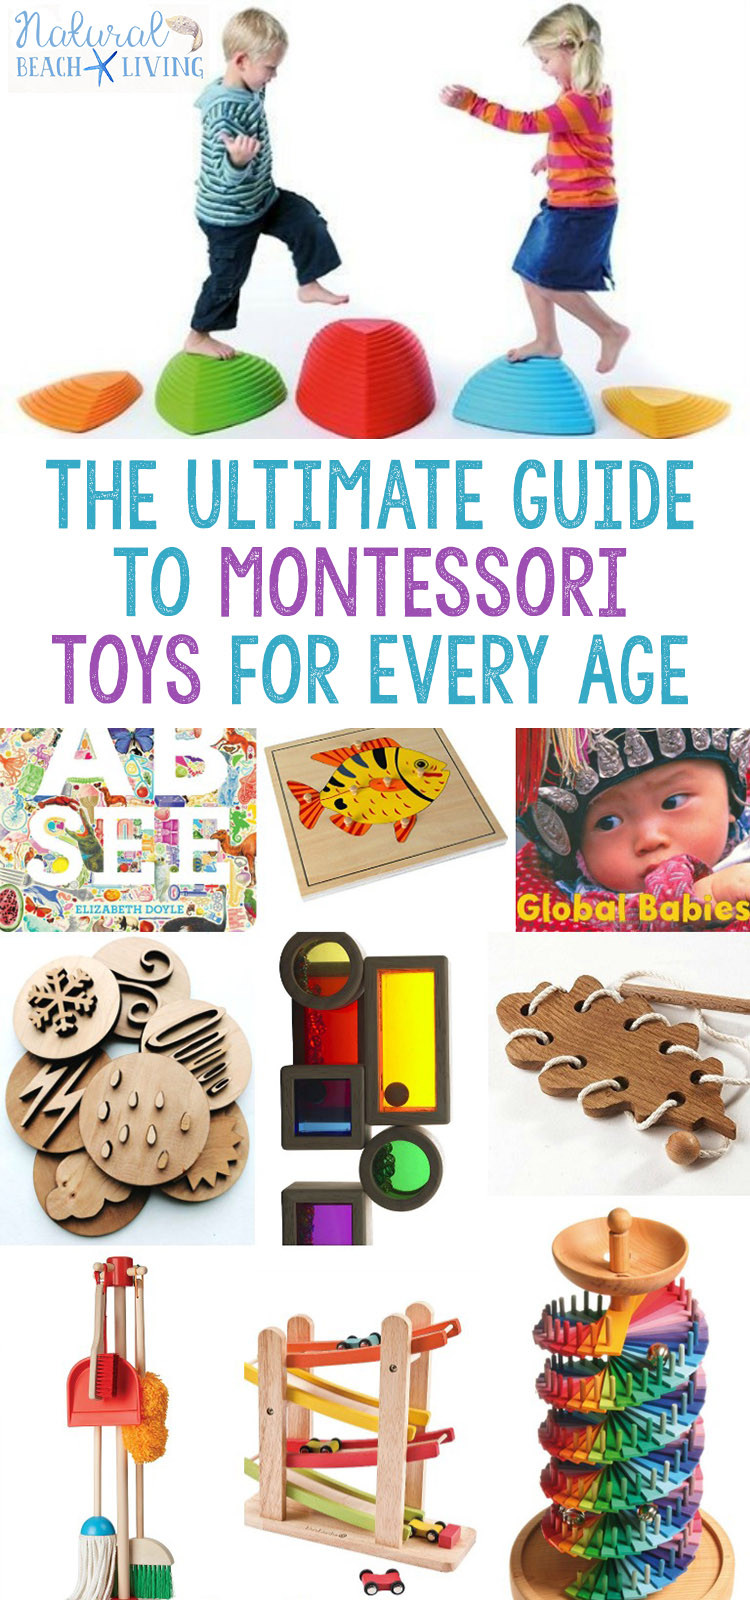 Gift Ideas For Girls Age 5
 The Best Montessori Toys for 5 Year Olds Natural Beach